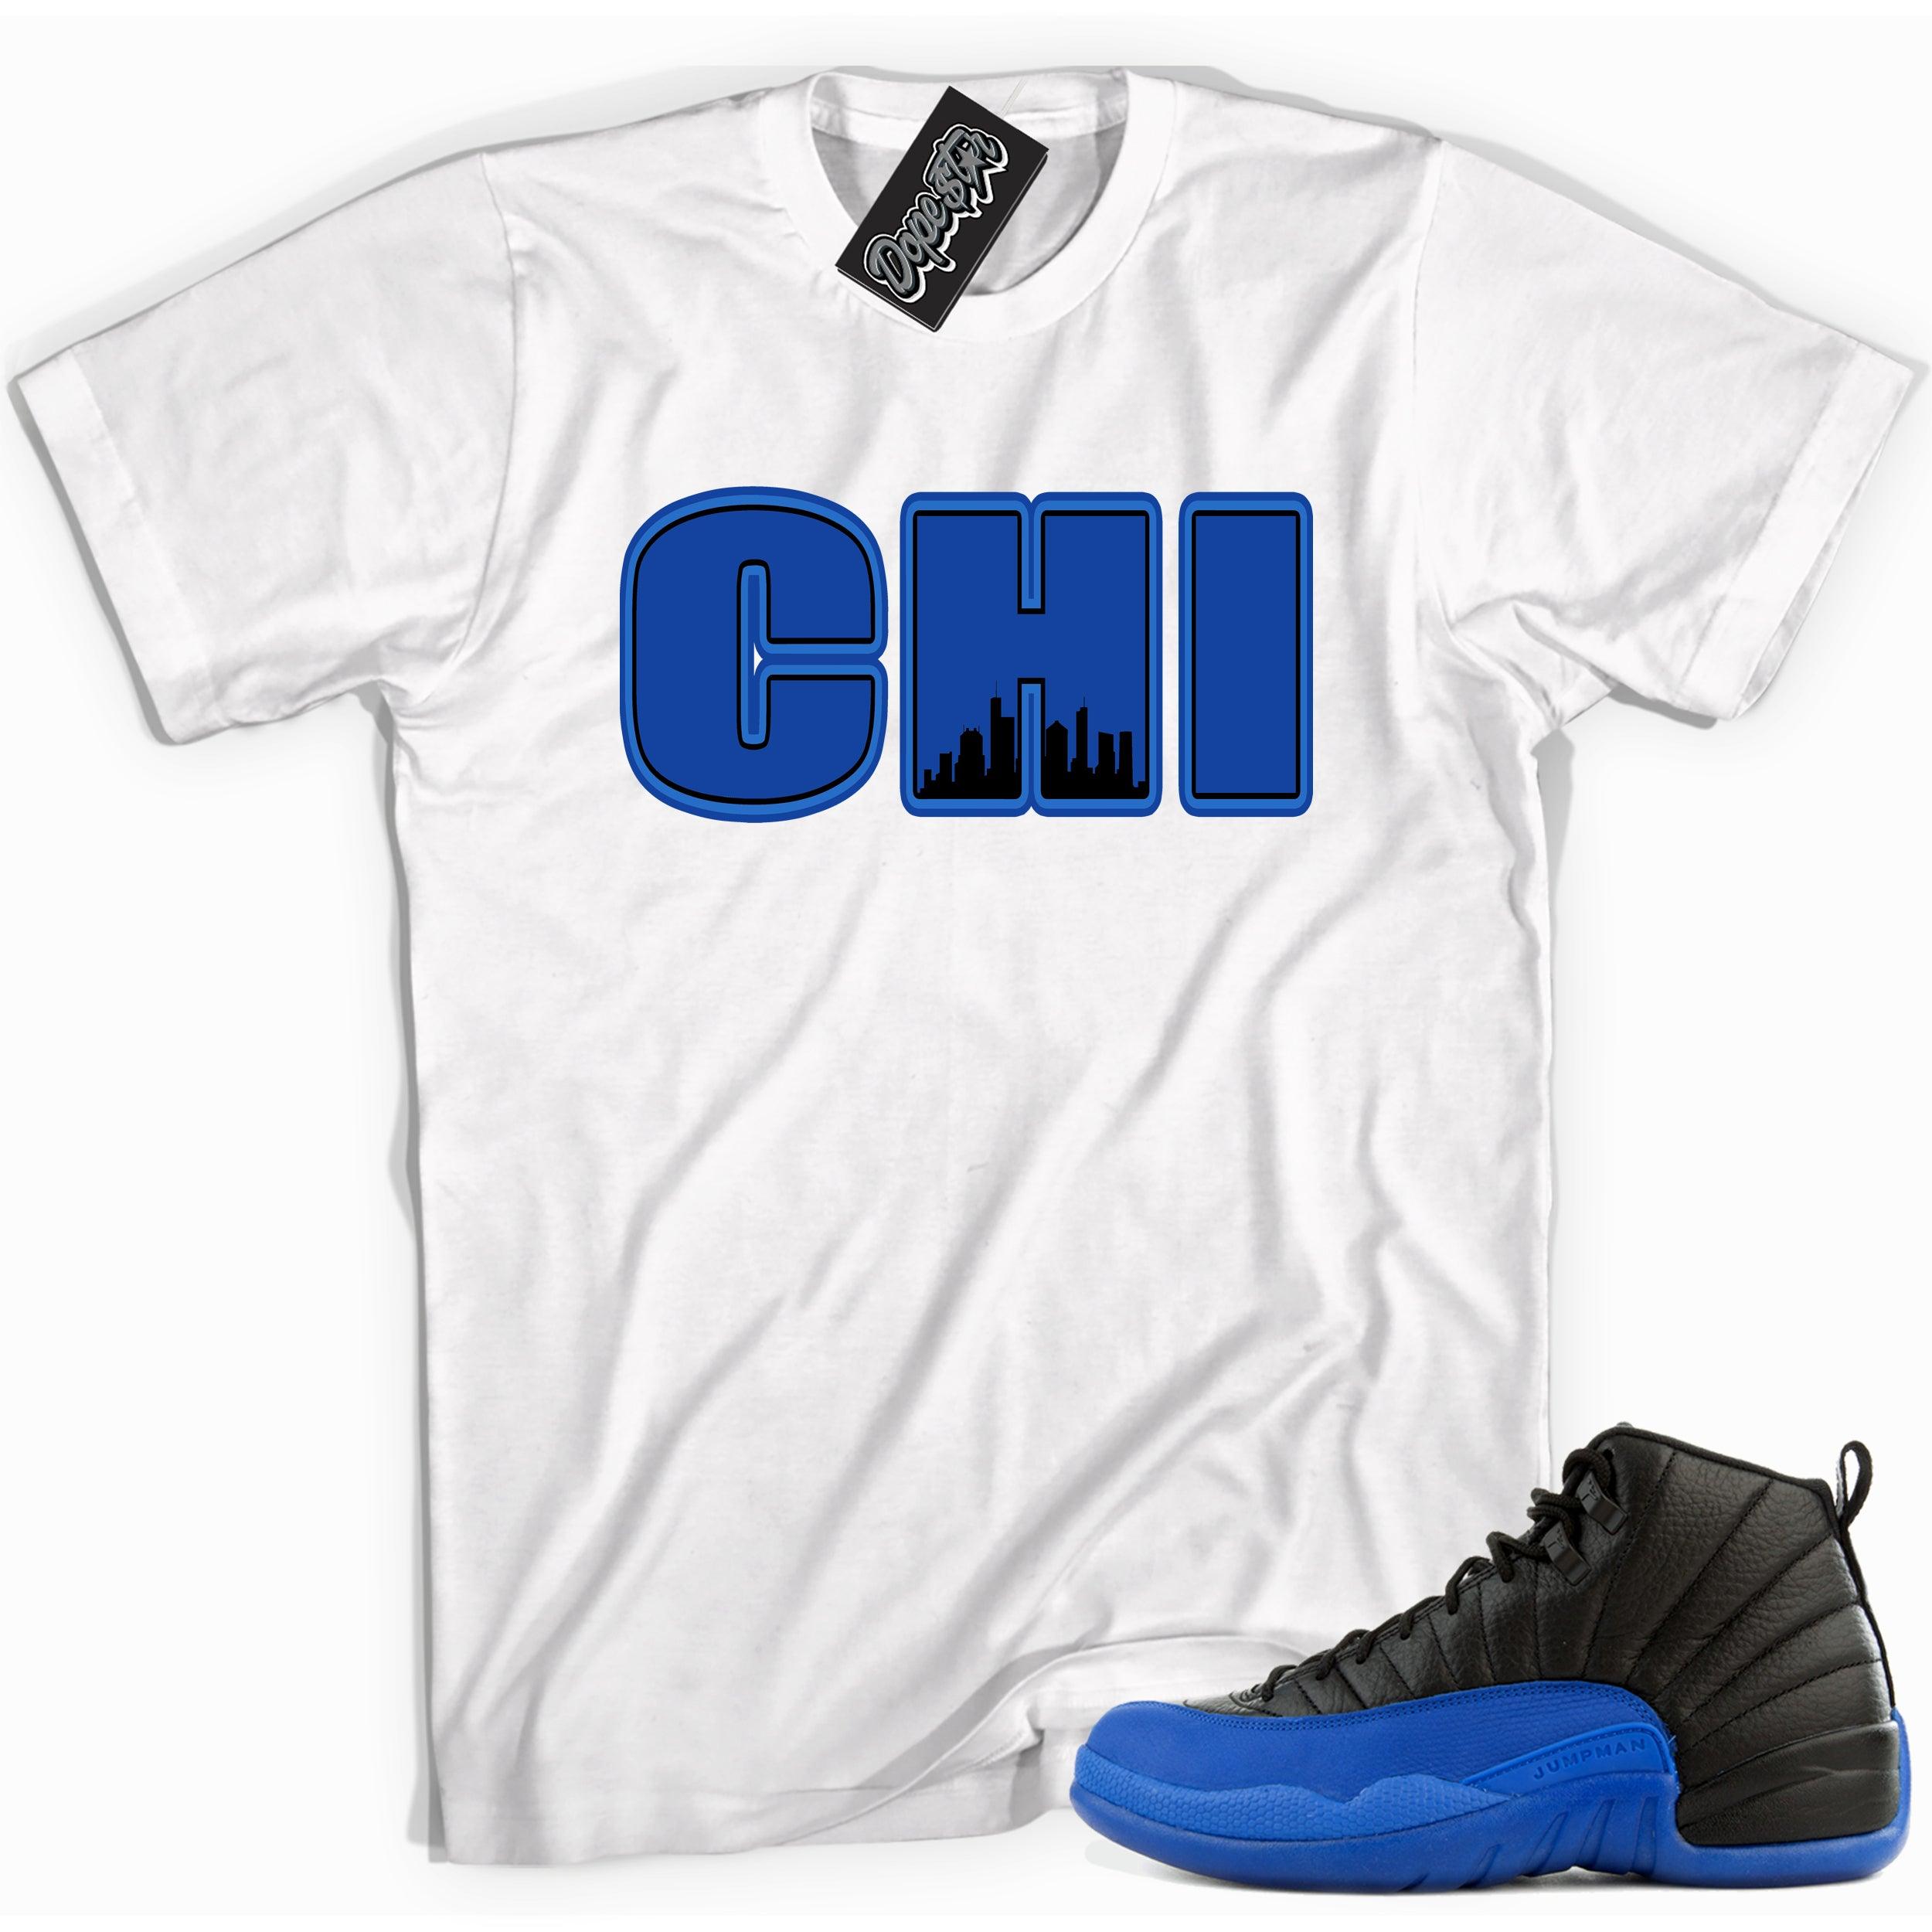 Cool white graphic tee with 'chi' print, that perfectly matches Air Jordan 12 Retro Black Game Royal sneakers.